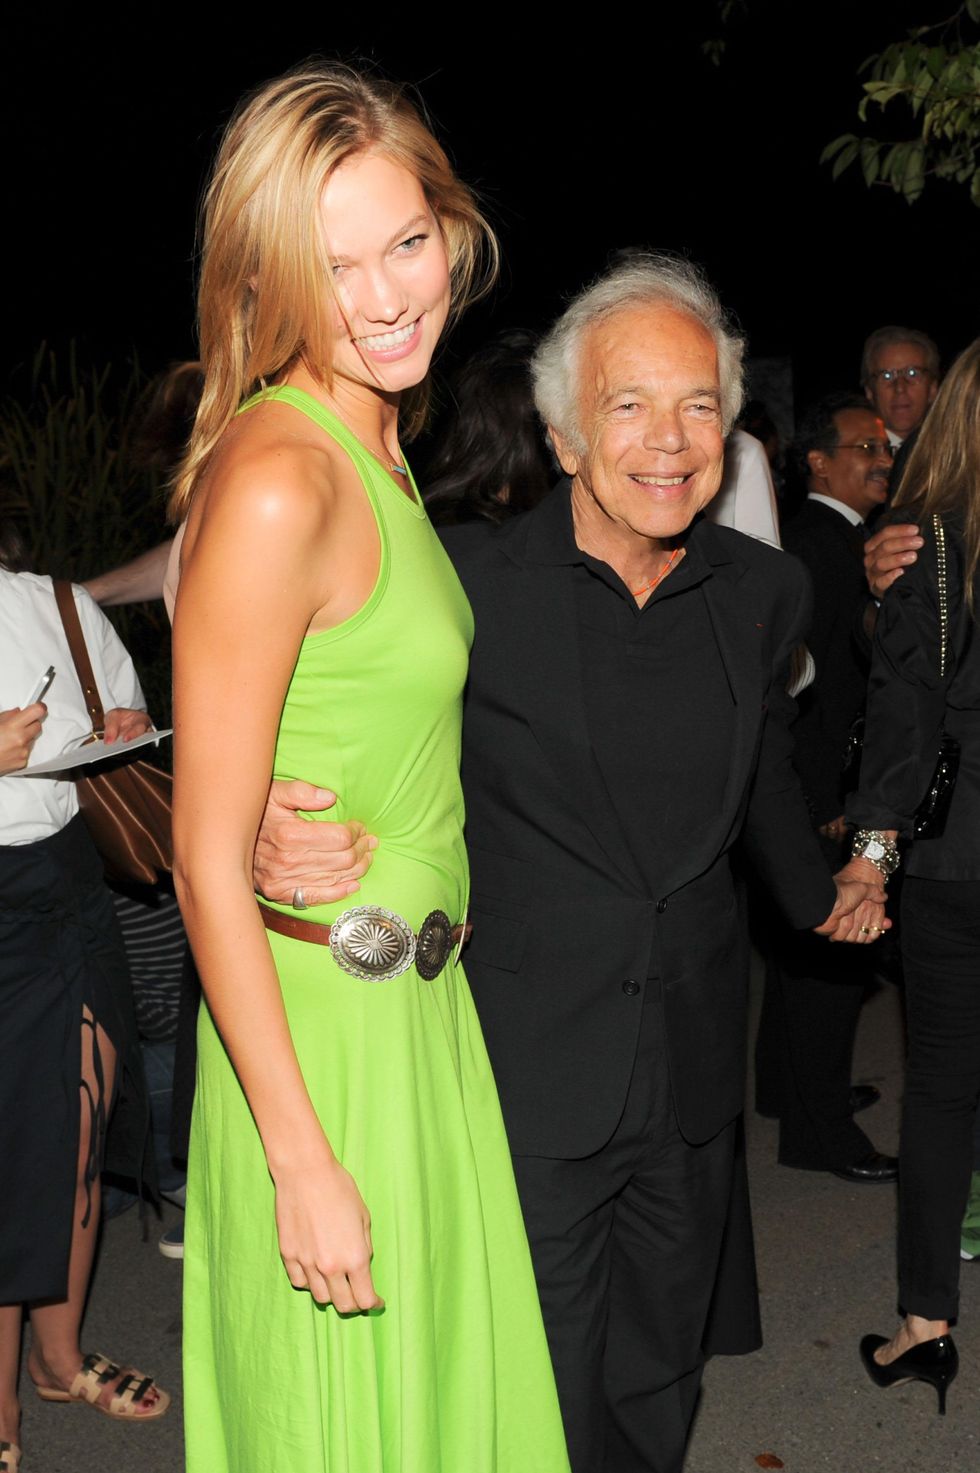 Karlie Kloss and Ralph Lauren at Polo event